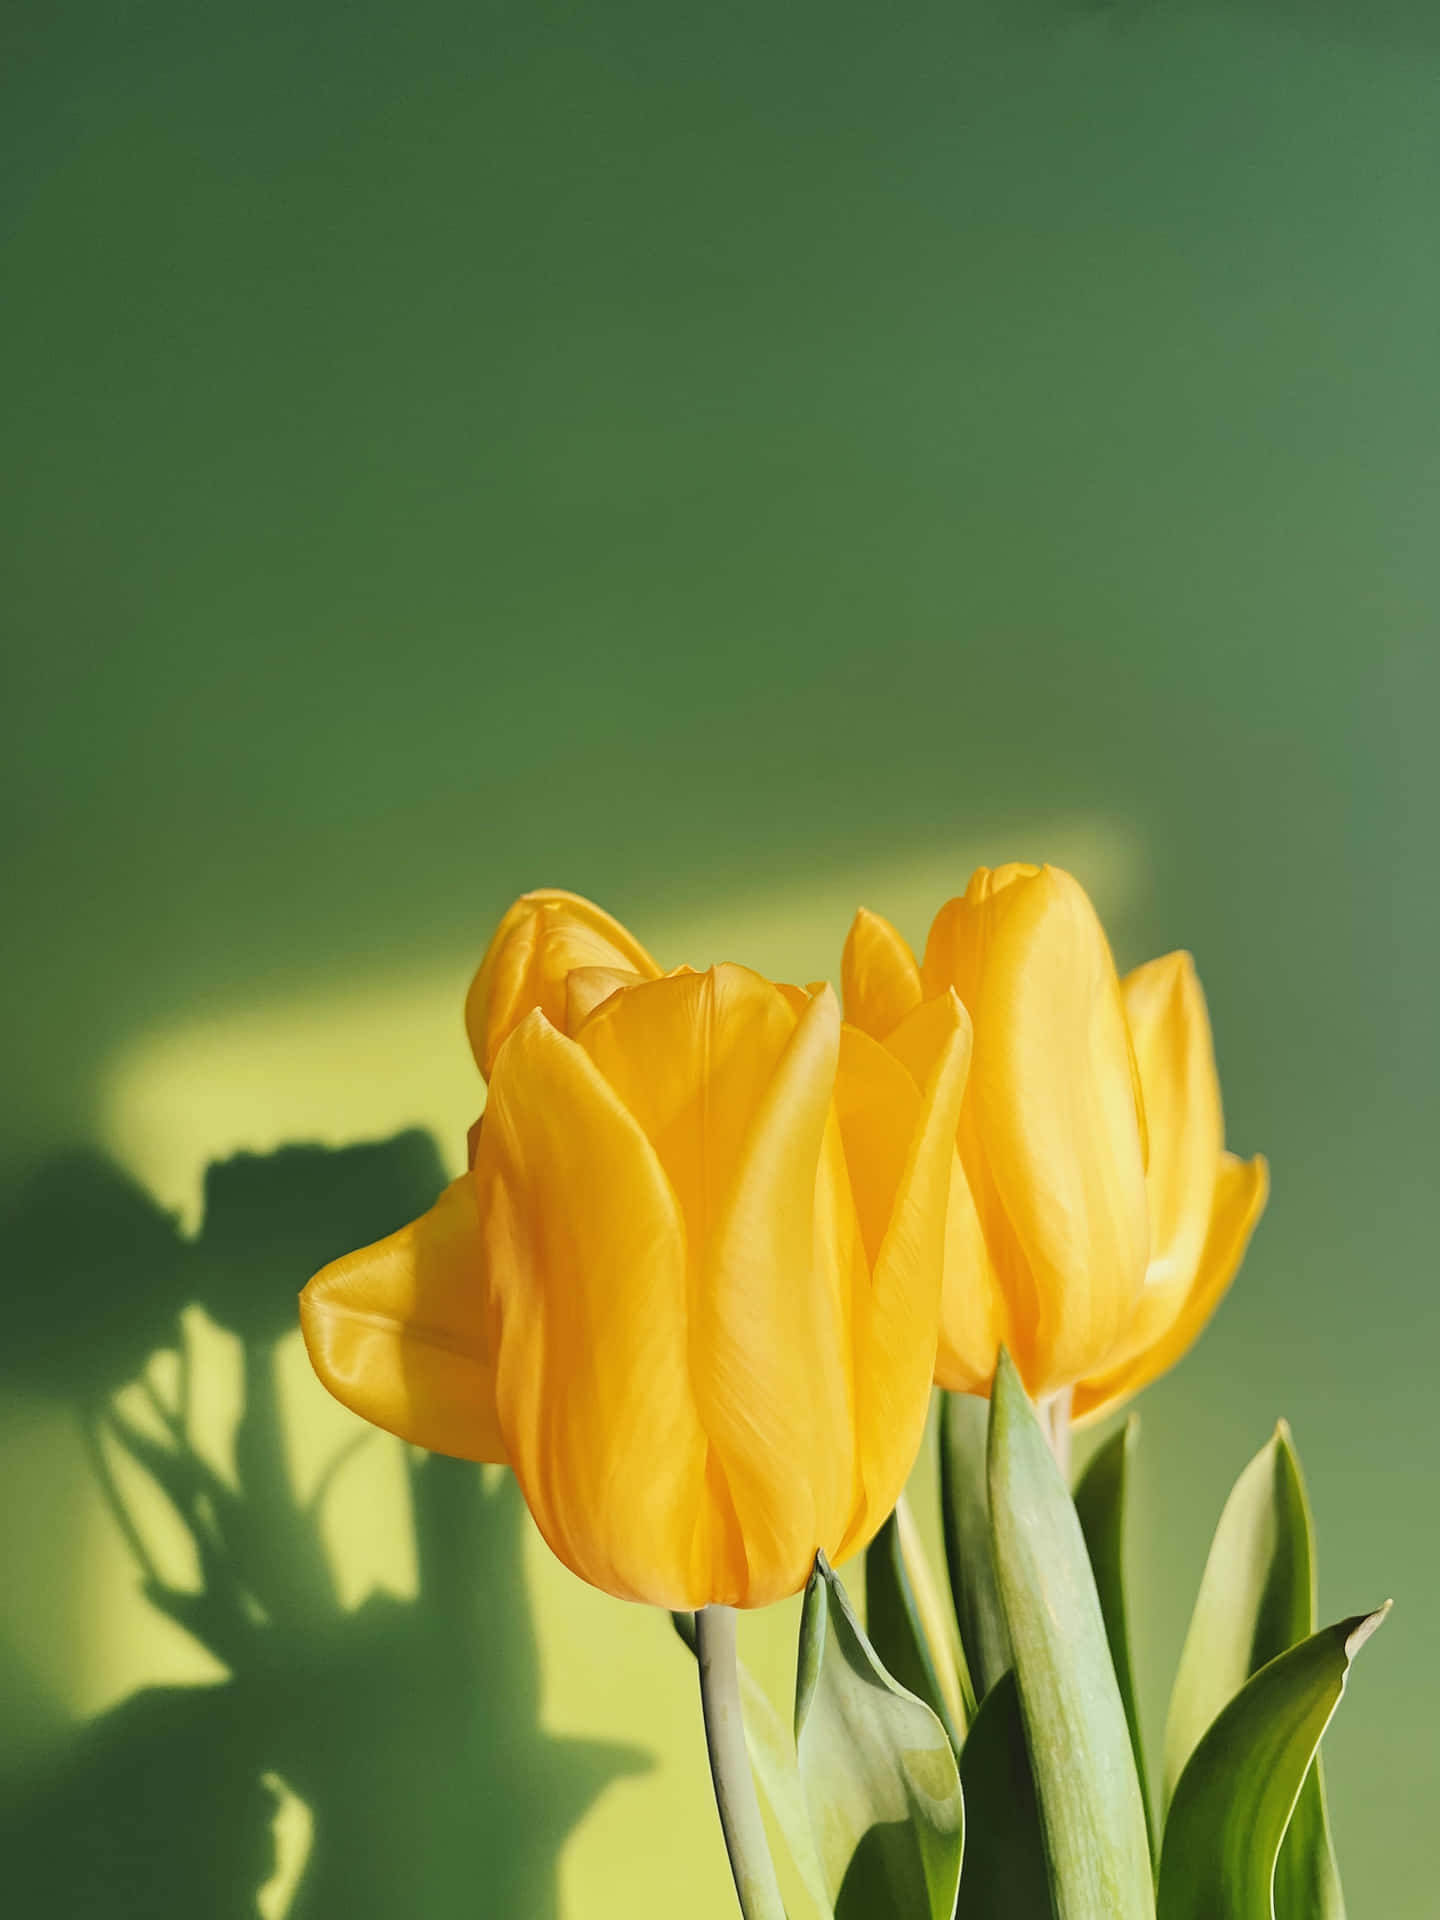 Blooming Yellow Tulips in a Sunny Garden Wallpaper